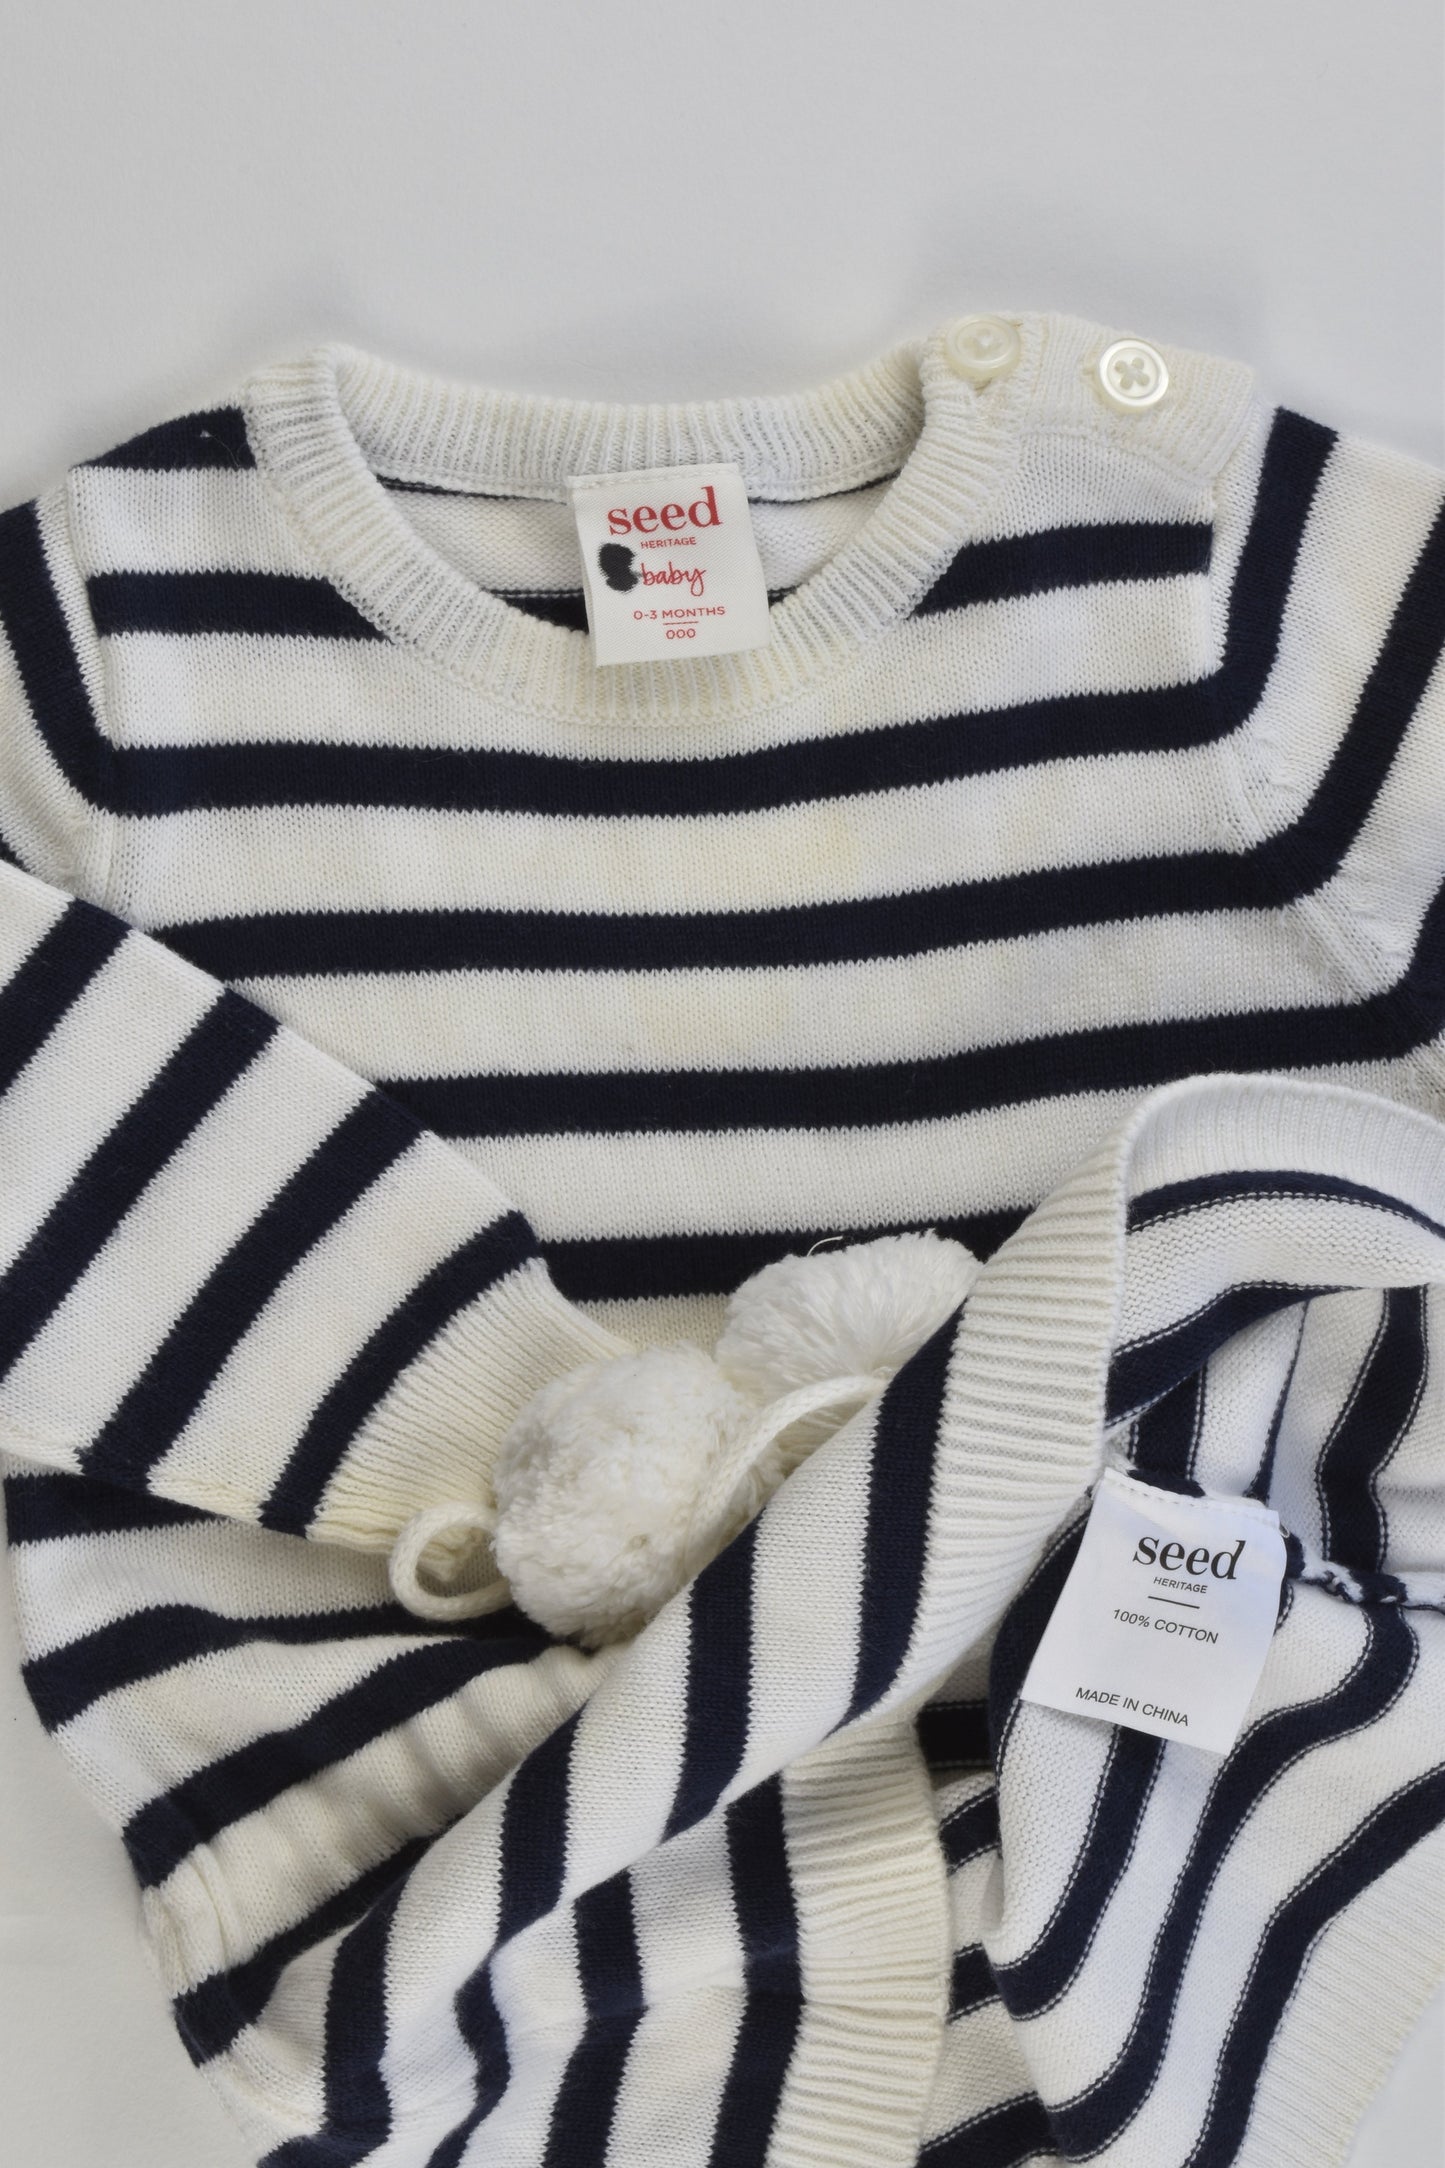 Seed Heritage Size 000 (0-3 months) Striped Knitted Dress with Pom Pom Belt